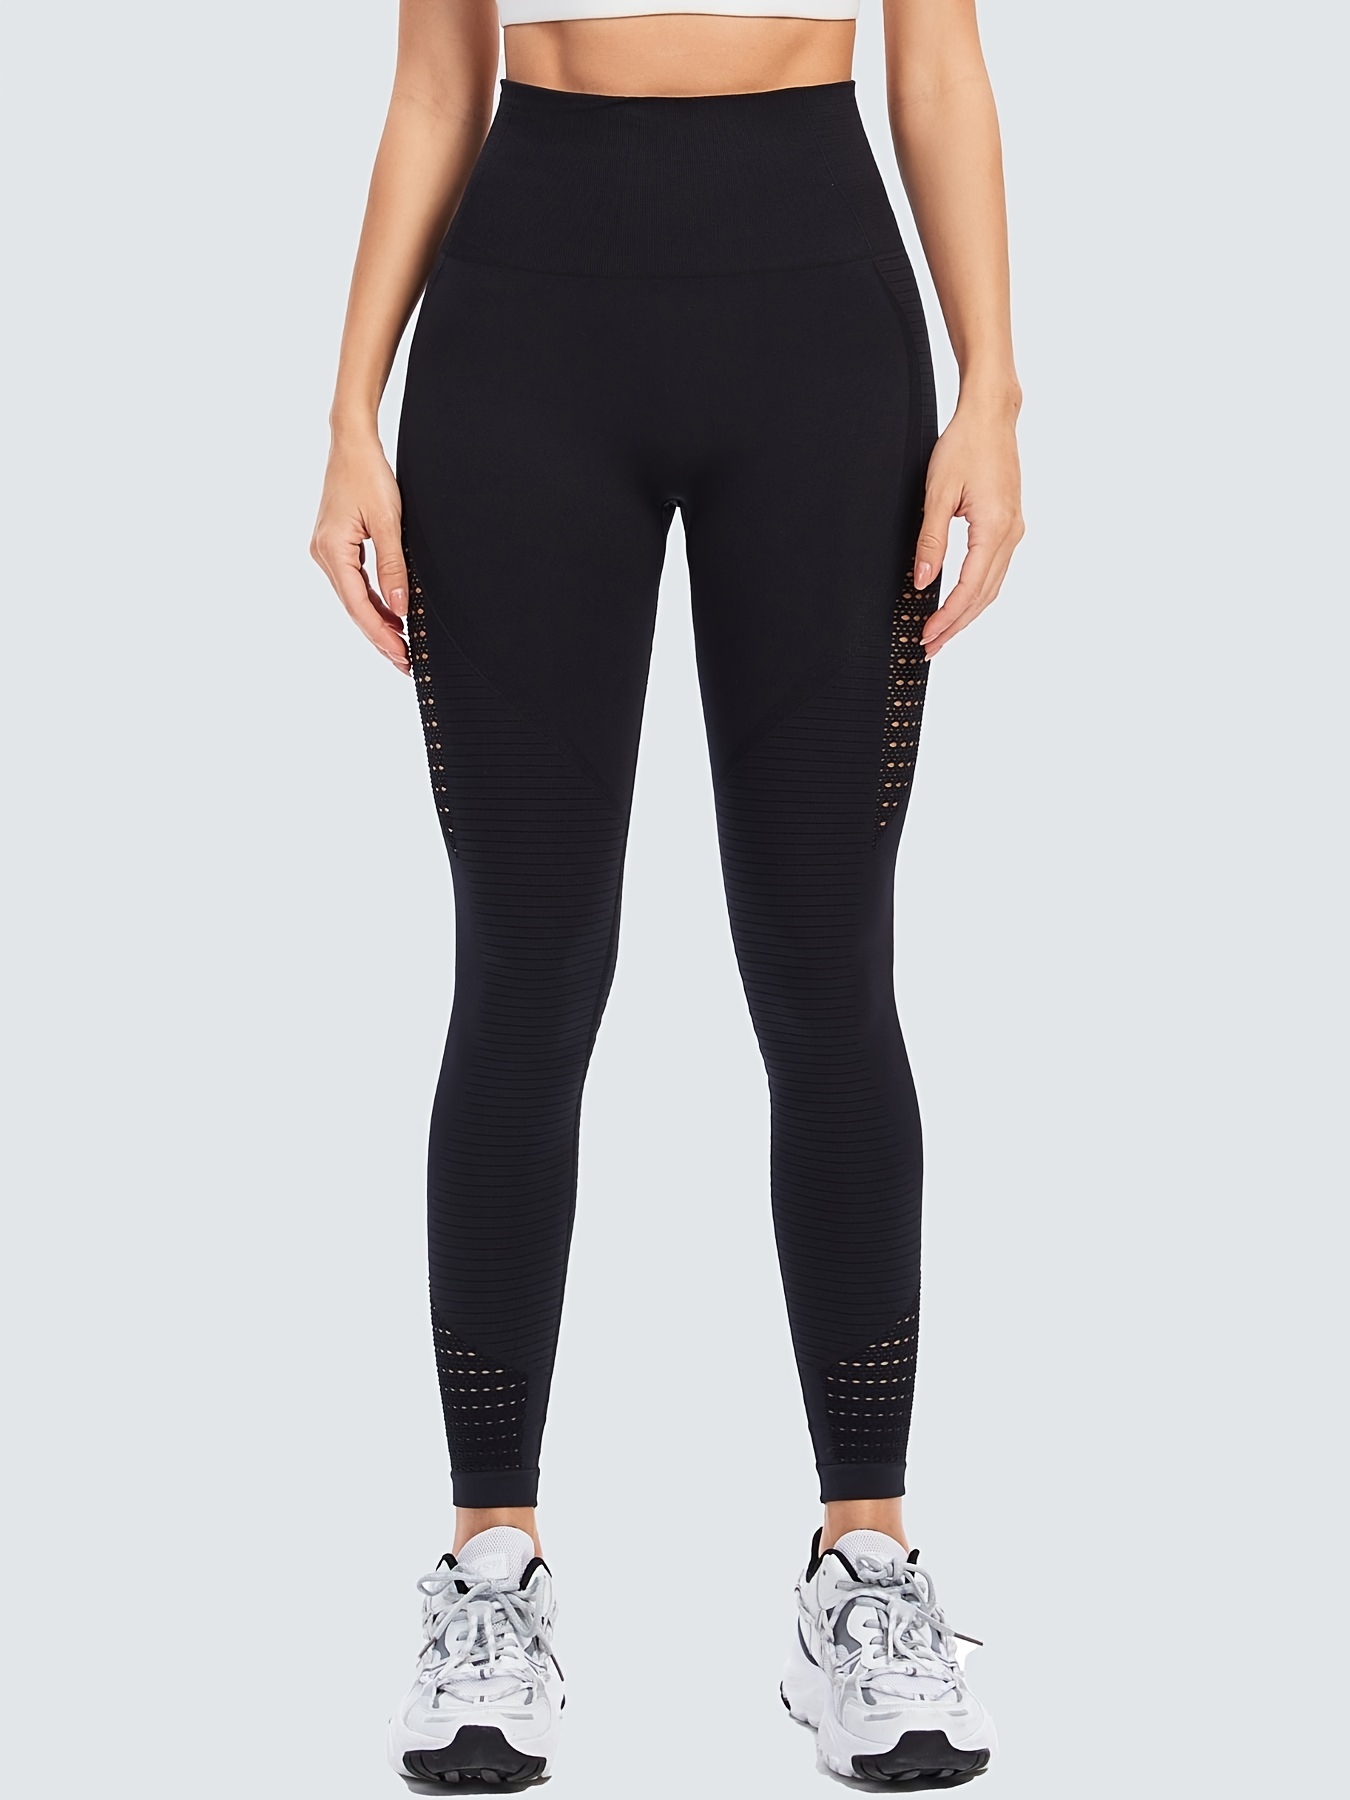 Laser Cut Smooth High Waisted leggings - Womens Activewear